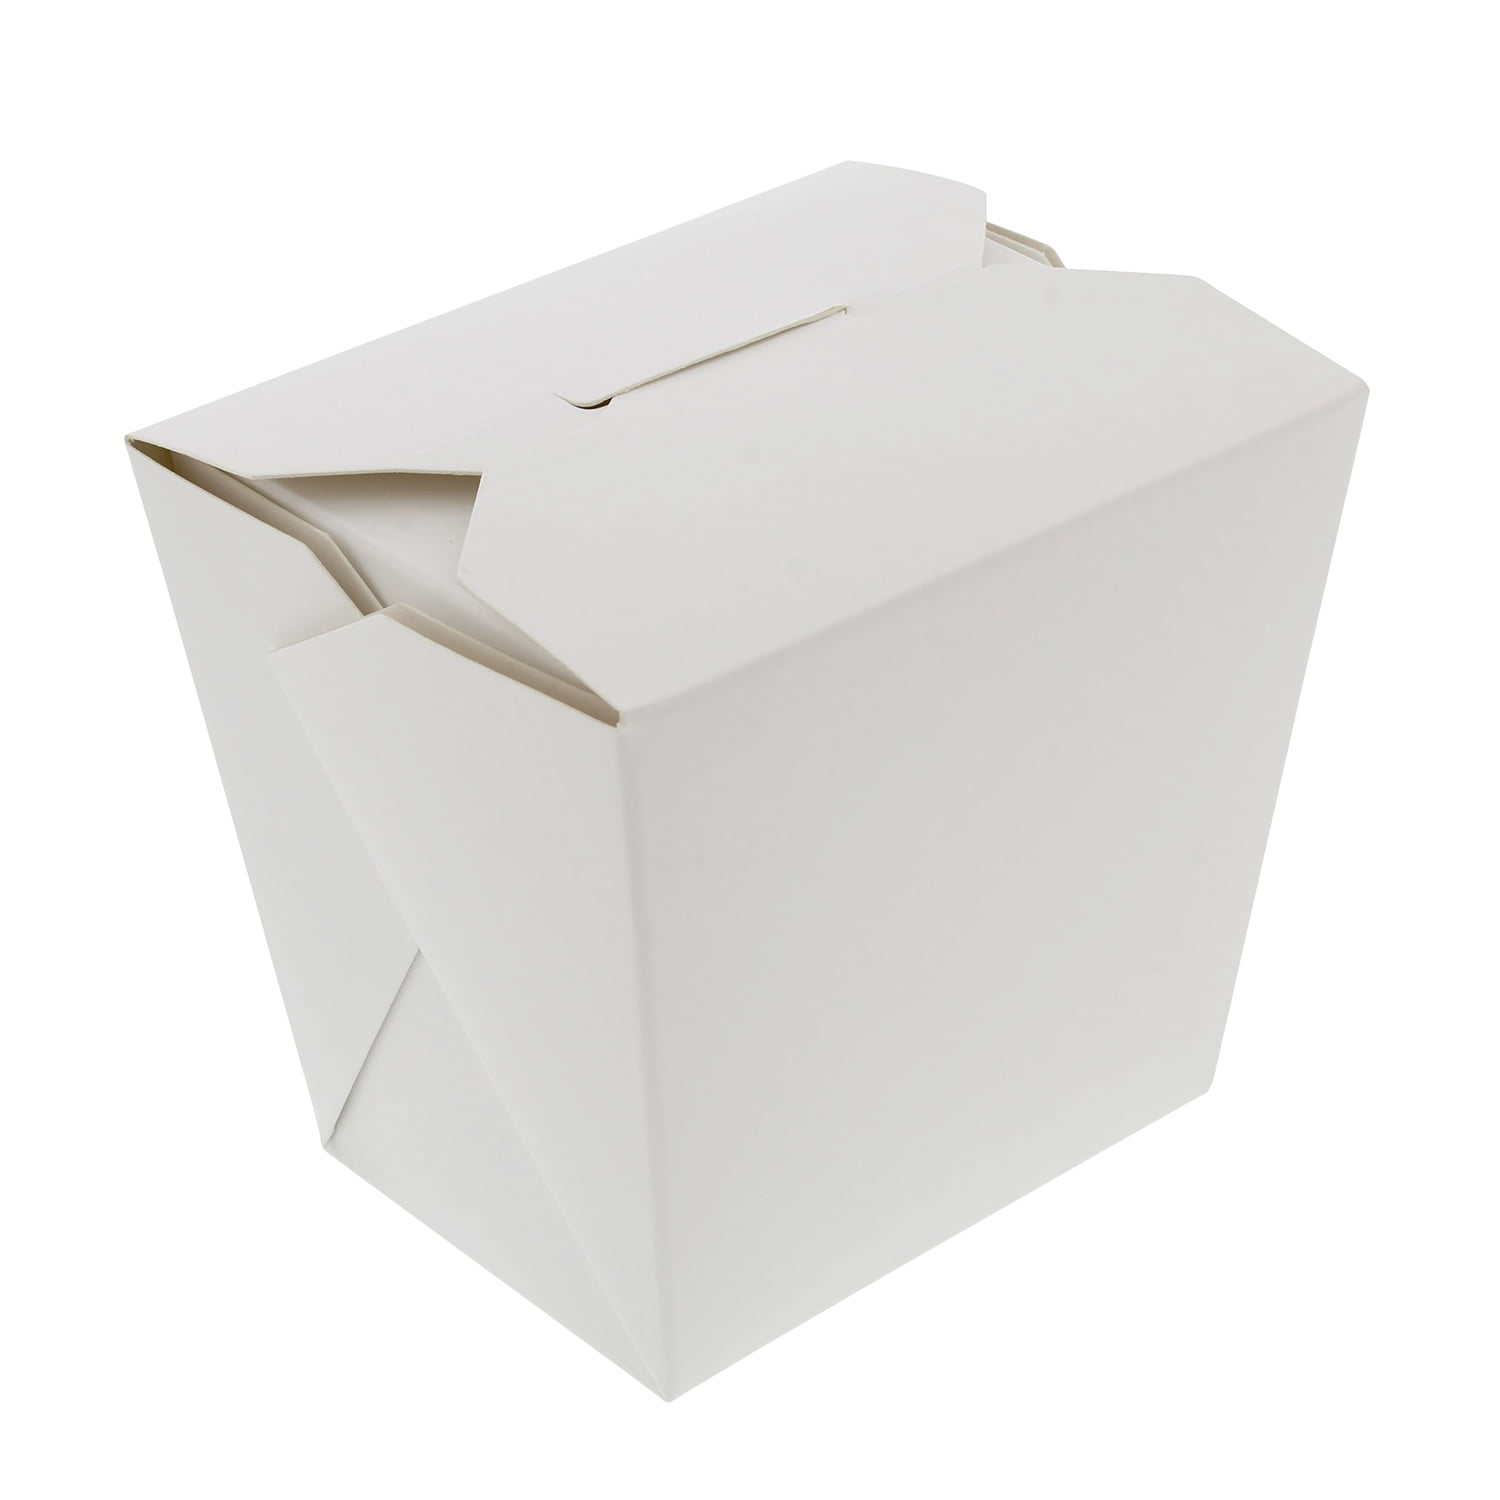 The Chinese-Takeout Container Is Uniquely American - The New York